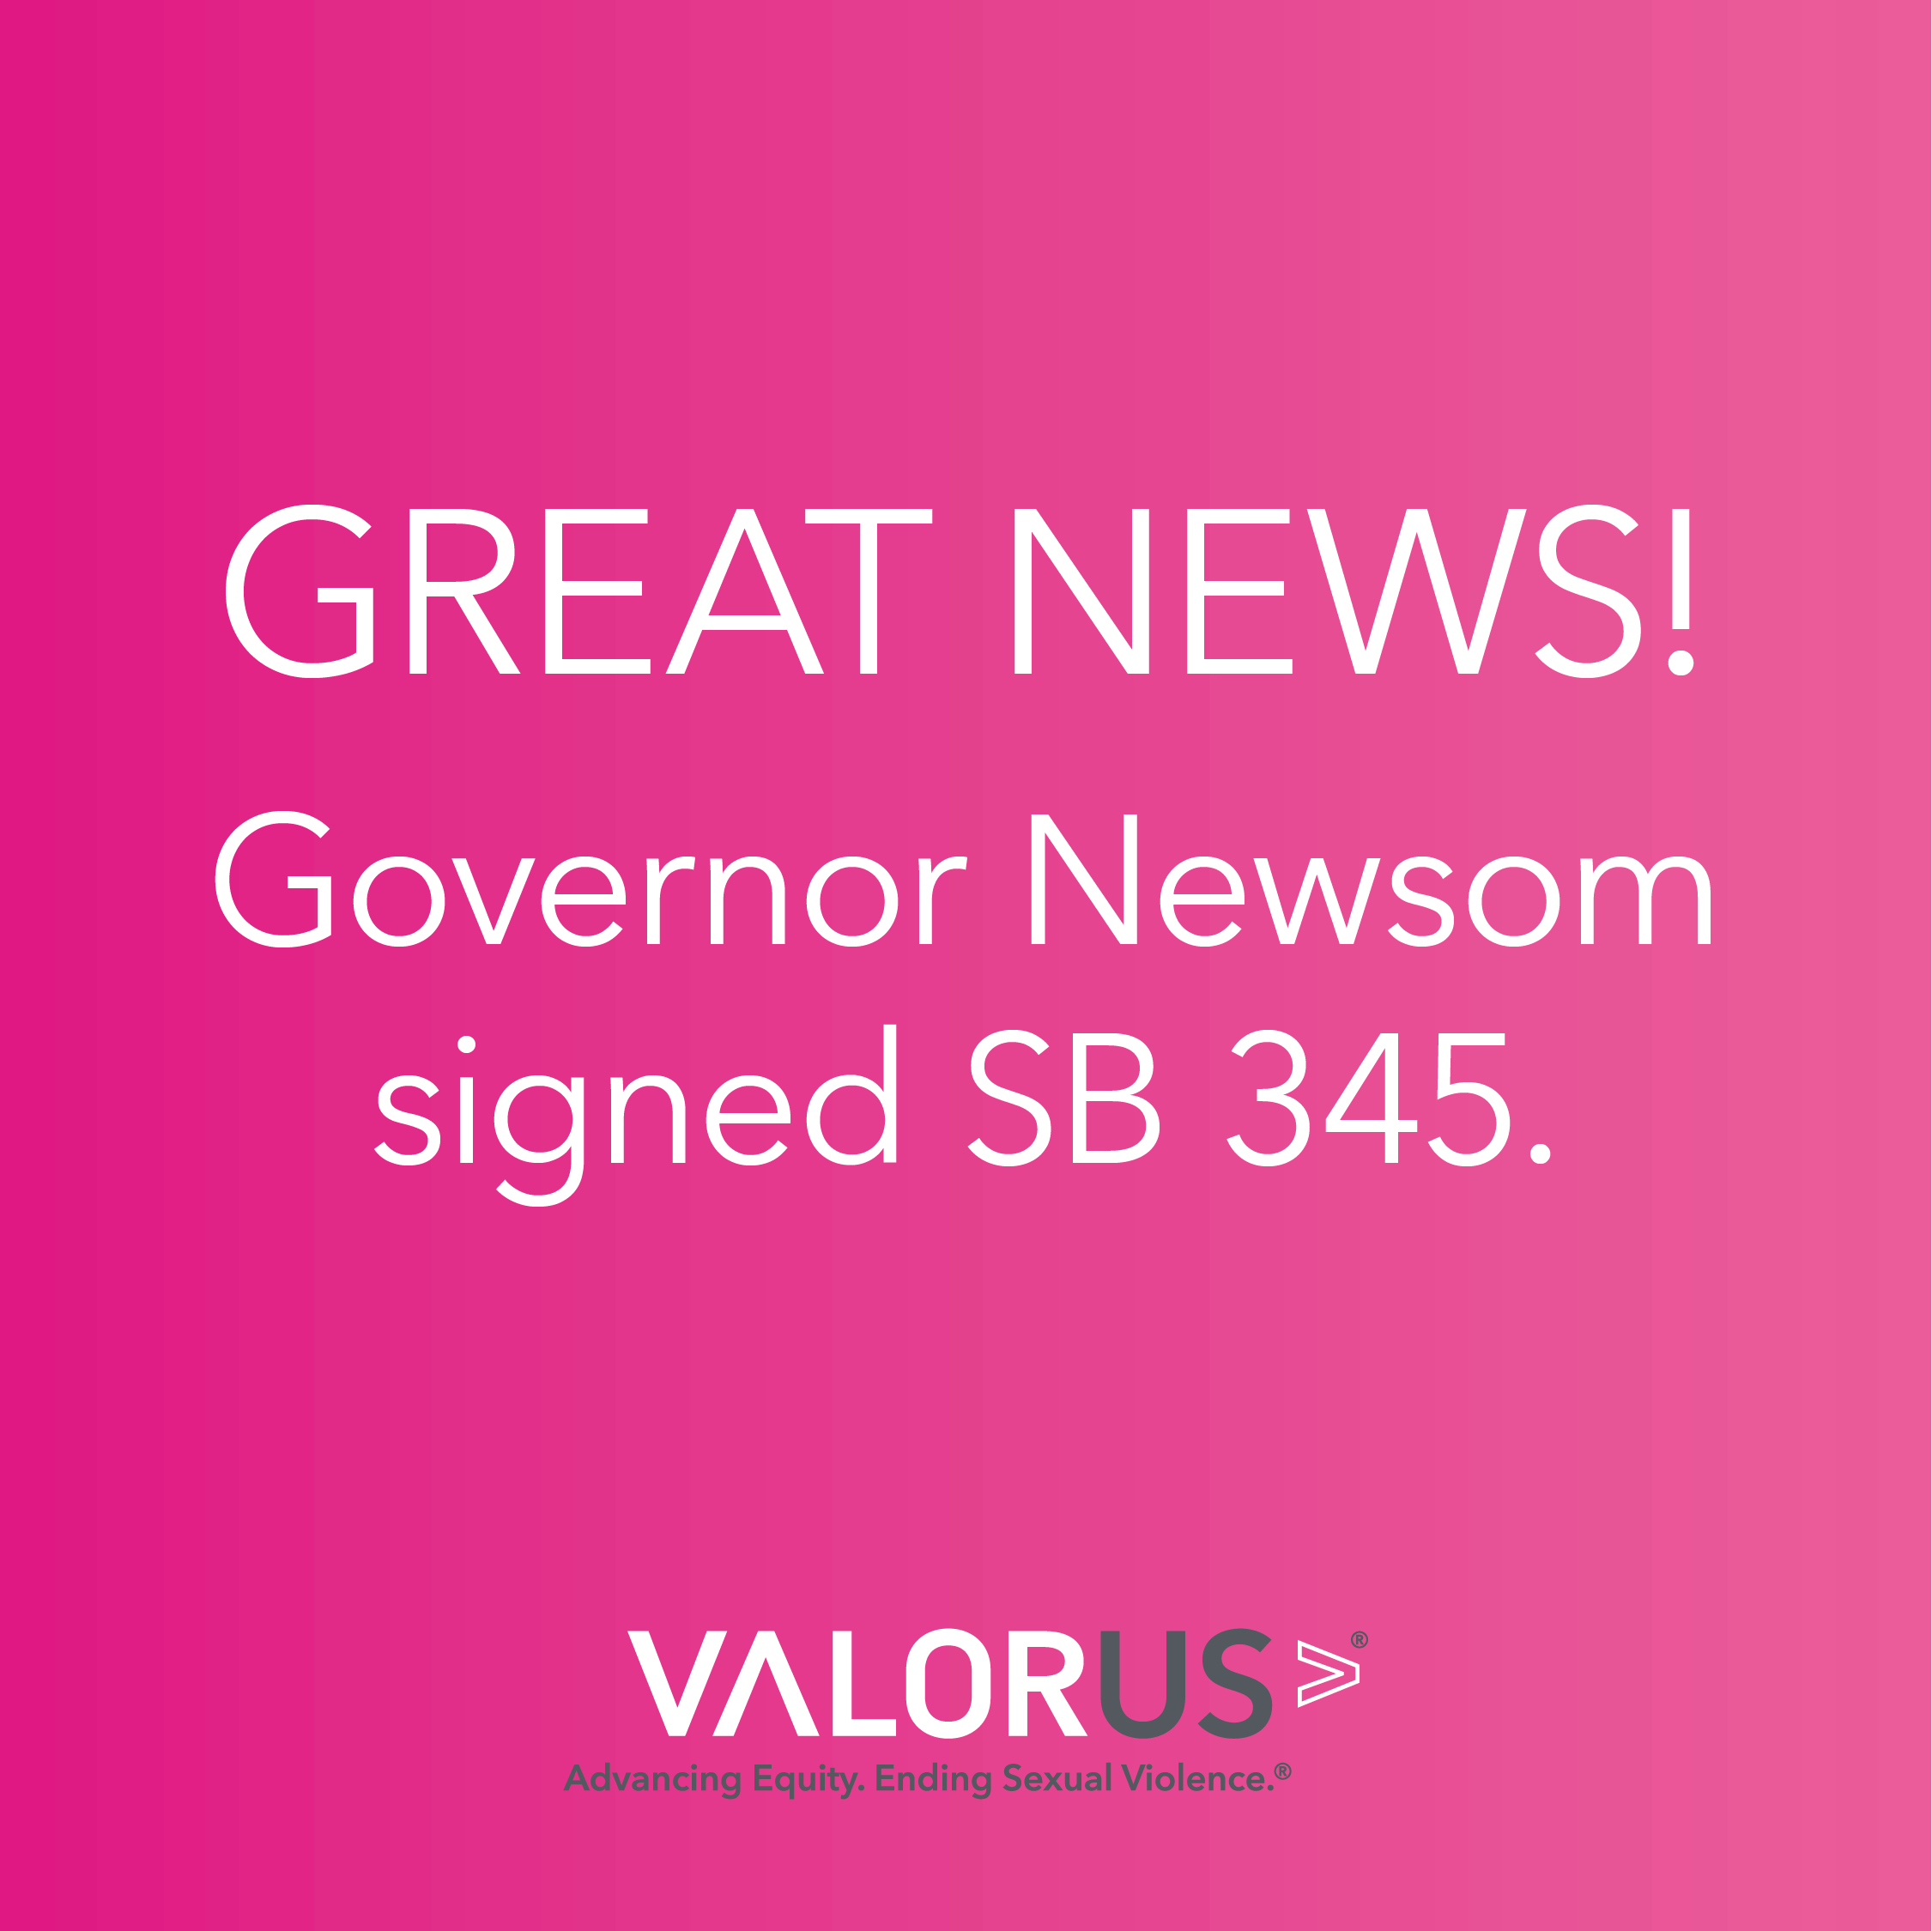 pink background with white text that says, “Great news! Governor Newsom signed SB 345.”